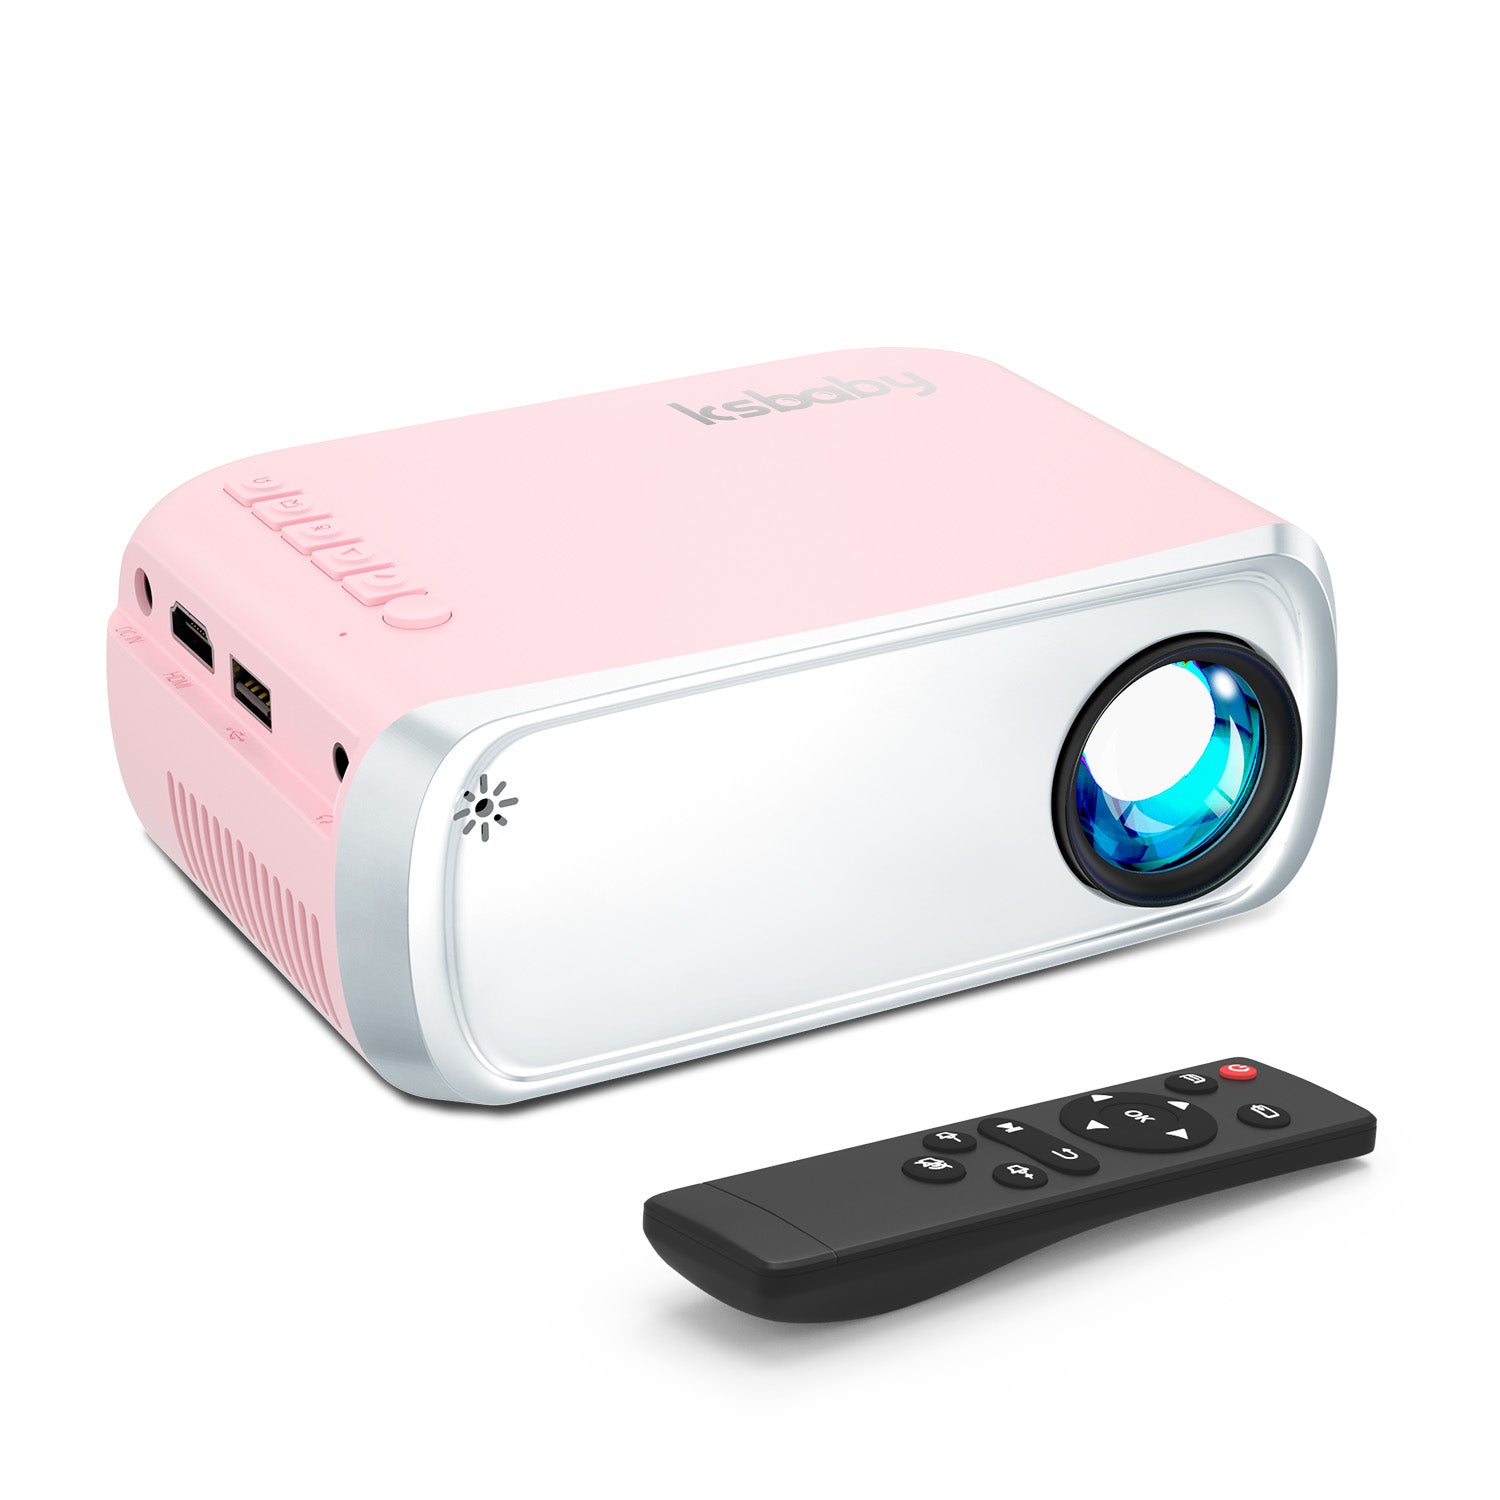 Portable Projector, ksbaby Projector Outdoor, LED Aesthetic Video Mini Projector for Outdoor Portable Movies Compatible with HDMI, USB, Laptop, TV Stick, iOS and Android Phone